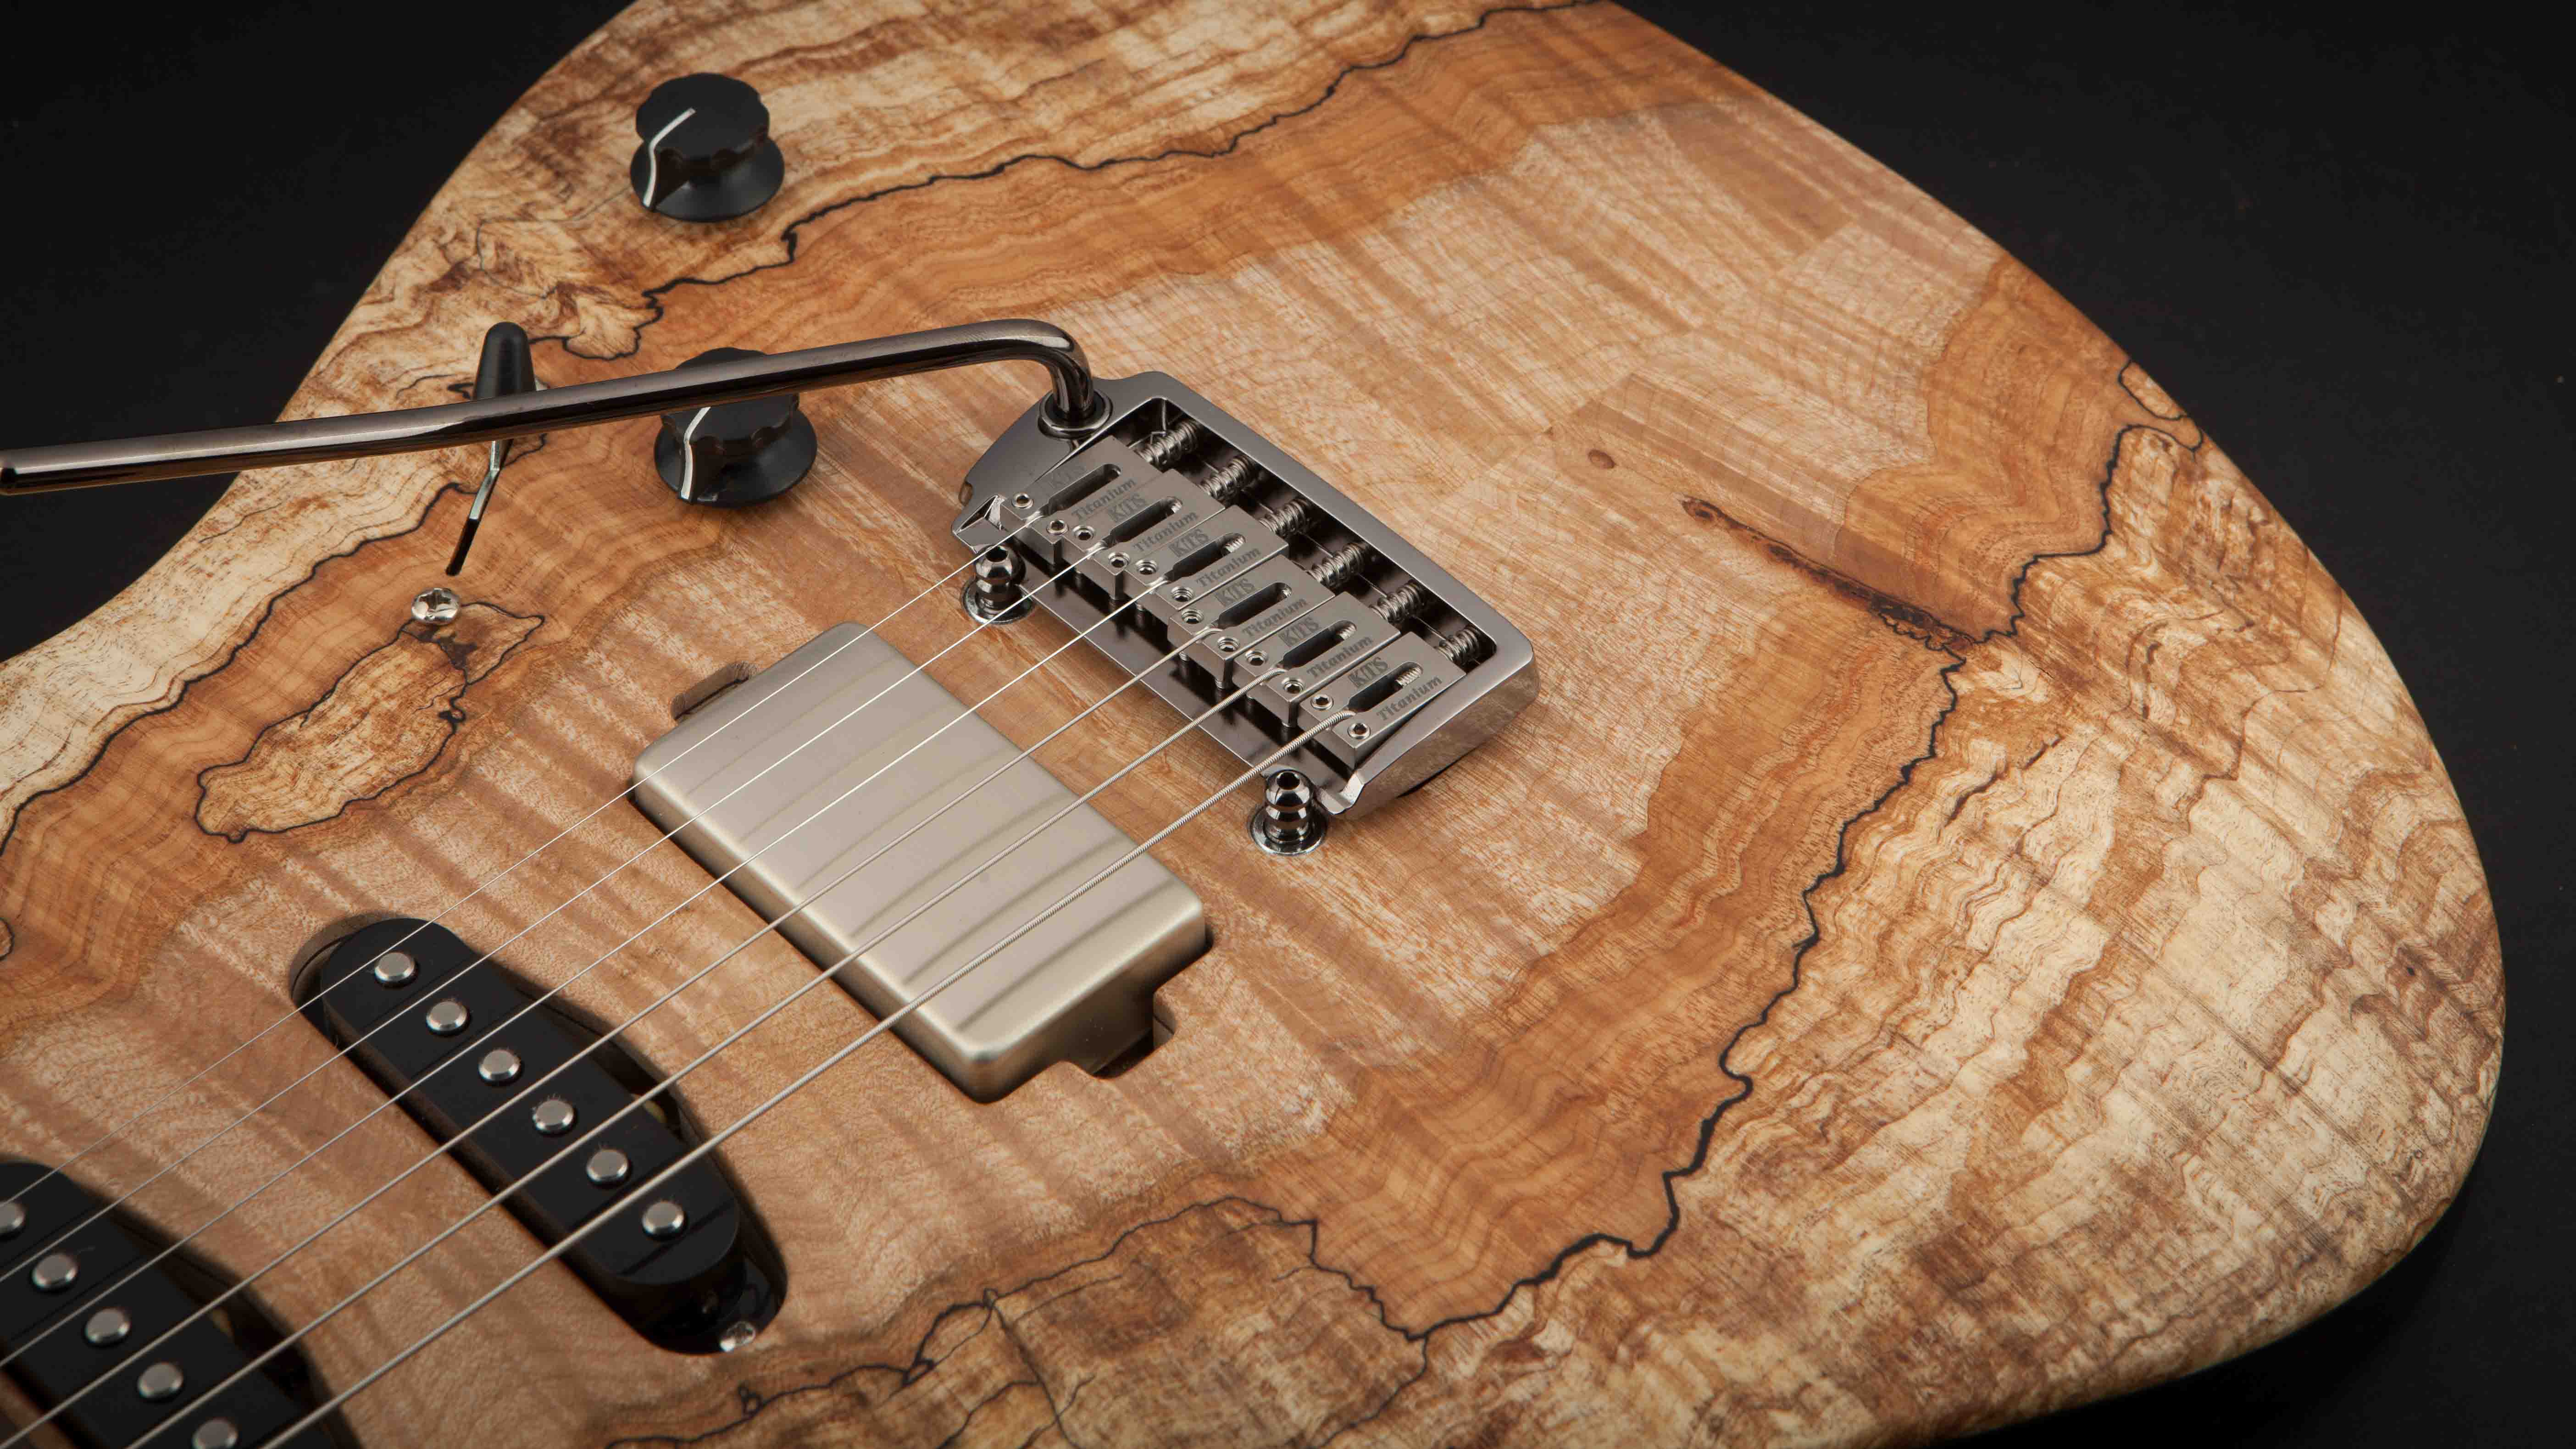 Patrick James Eggle 96 Drop Top Spalted Maple #17591